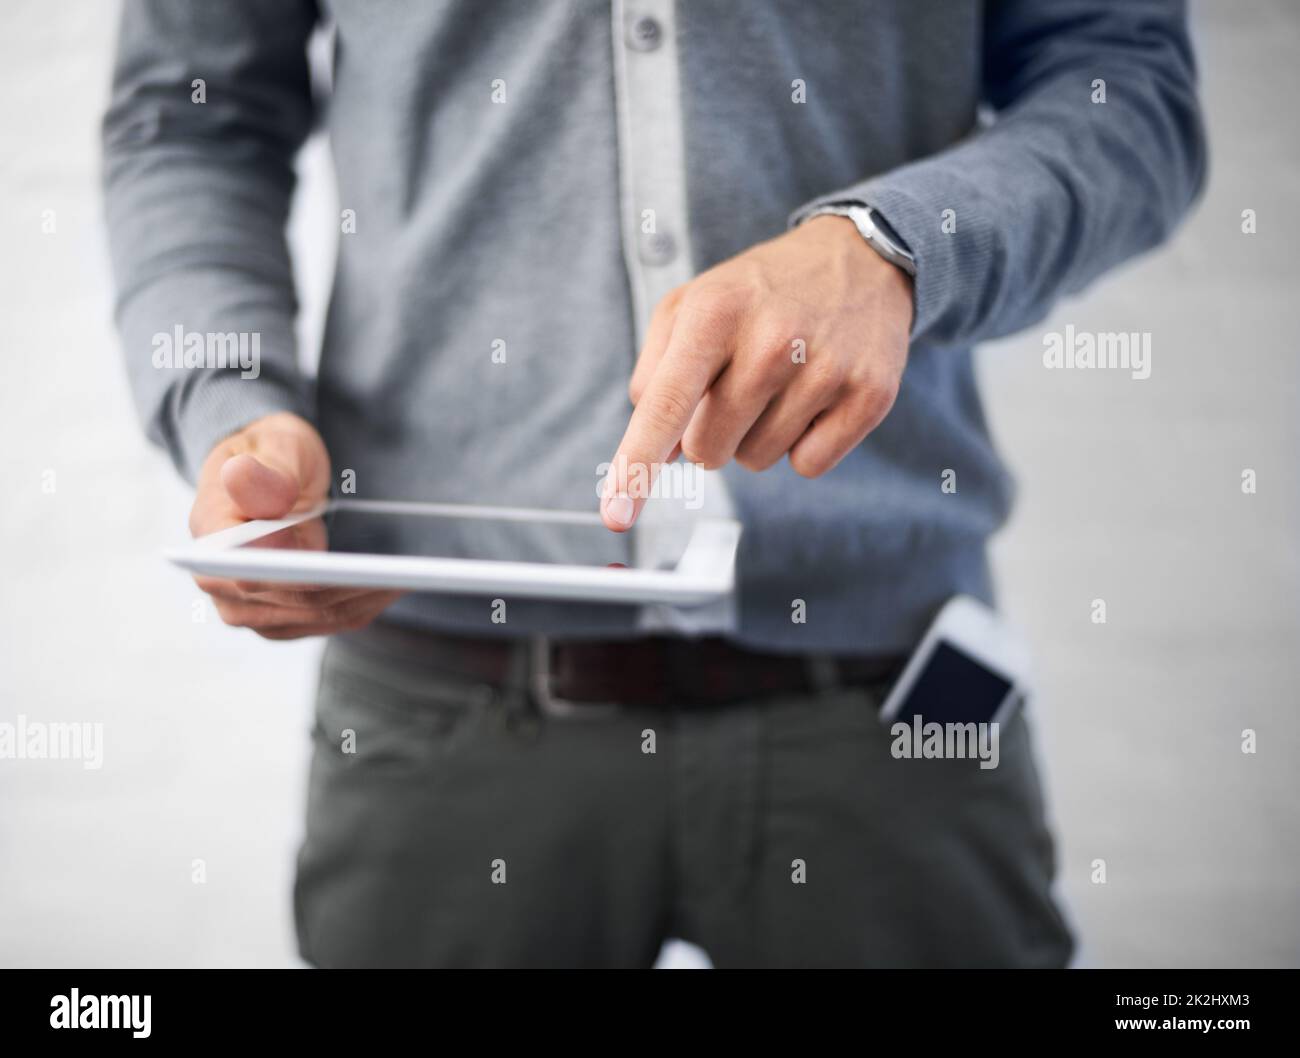 Managing his diary online. Cropped image of a young man working on his digital tablet. Stock Photo